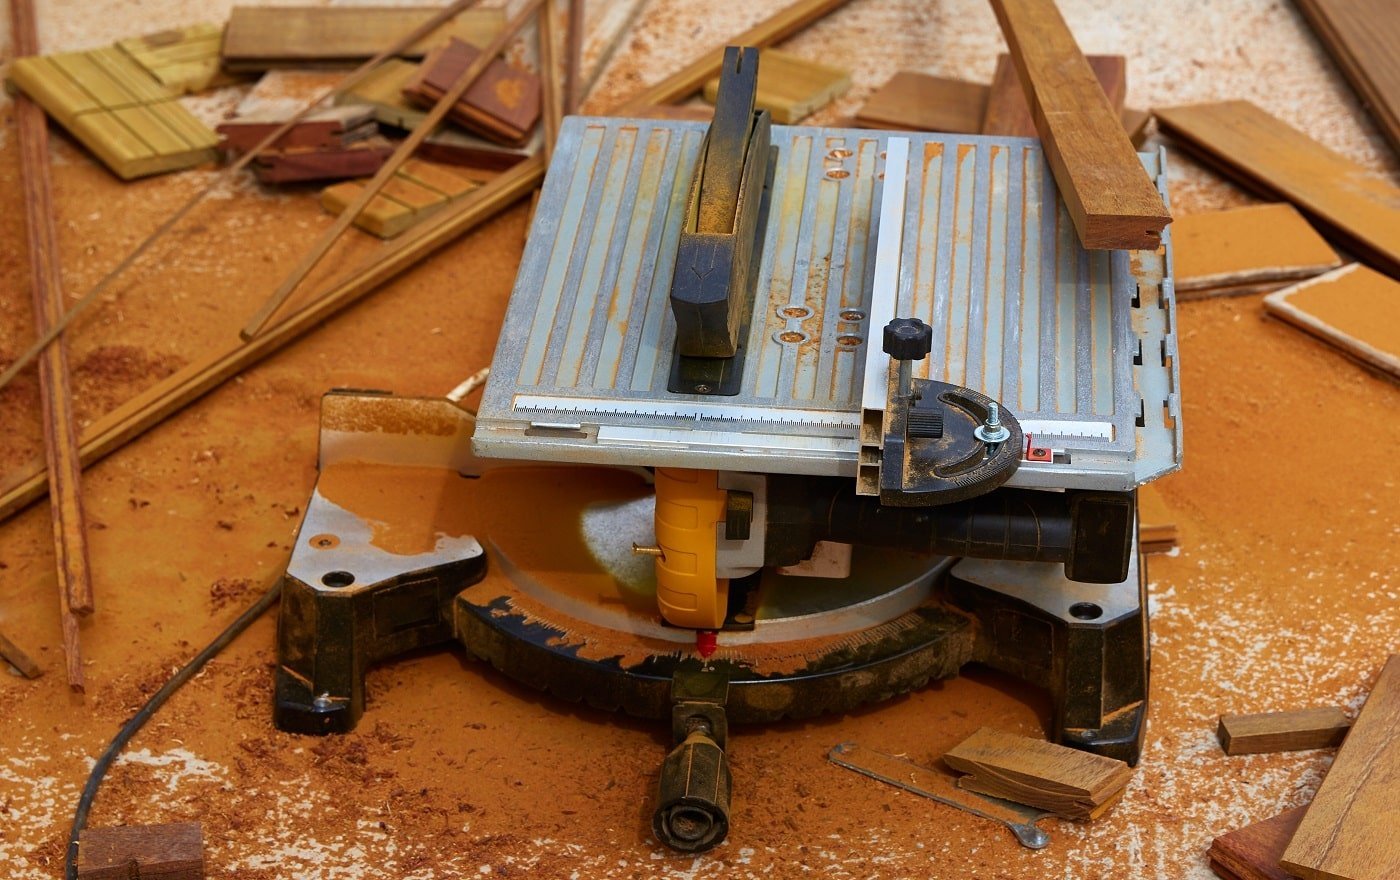 Circular table saw carpenter tool and sawdust in deck installation